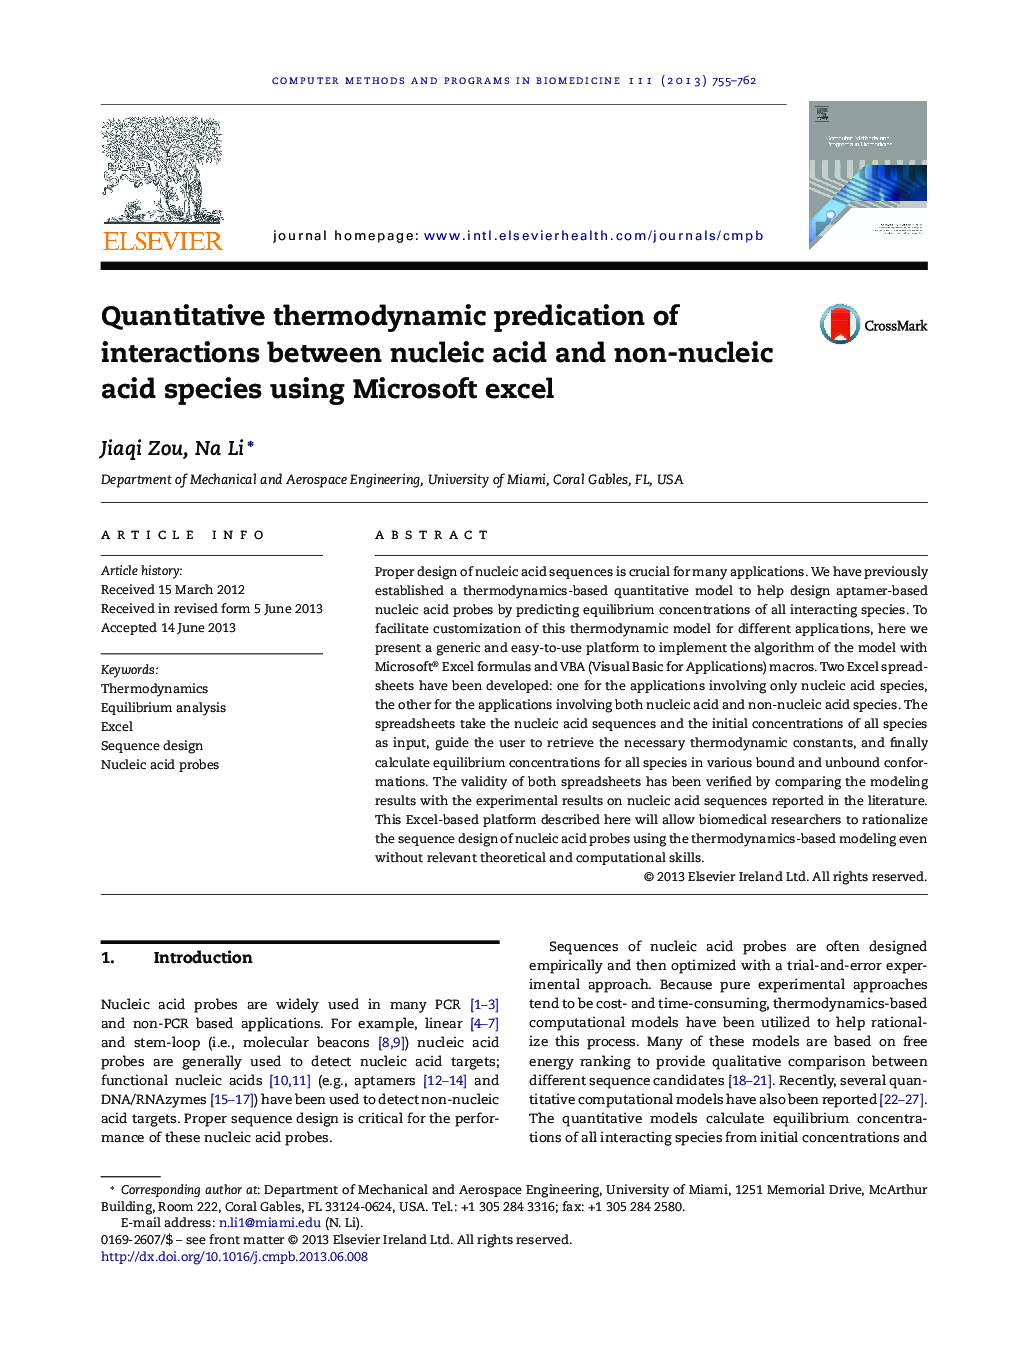 Quantitative thermodynamic predication of interactions between nucleic acid and non-nucleic acid species using Microsoft excel